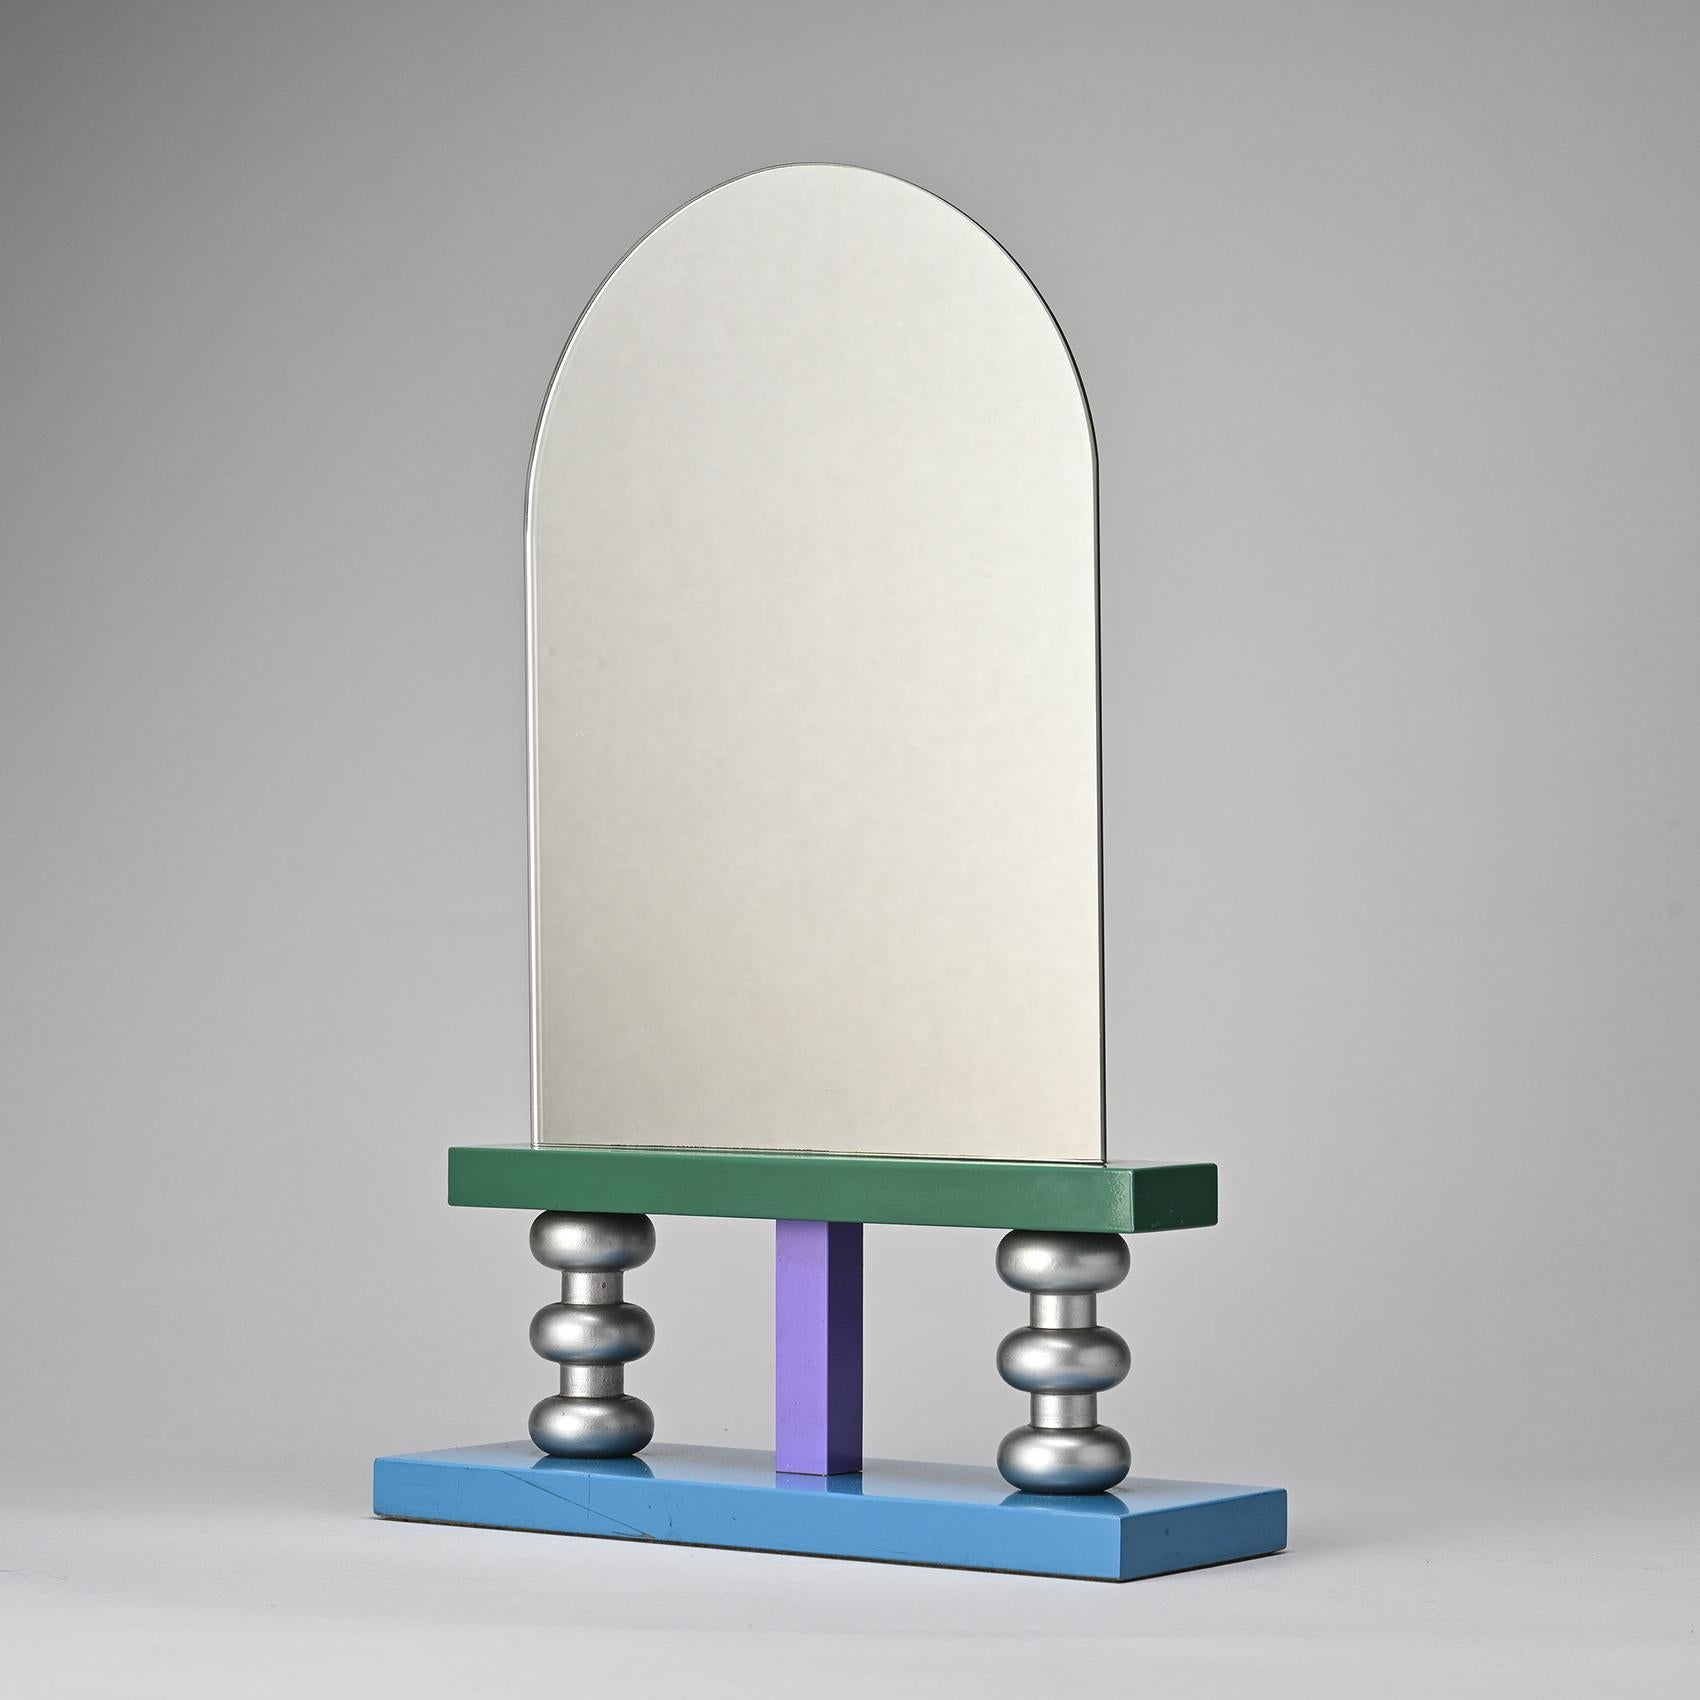 Nathalie Du Pasquier is a prolific artist and designer, renowned for her pivotal role as a member of the Memphis group, whose groundbreaking creations defined the design landscape of the 1980s.

This multicolored lacquered wood table mirror, dating